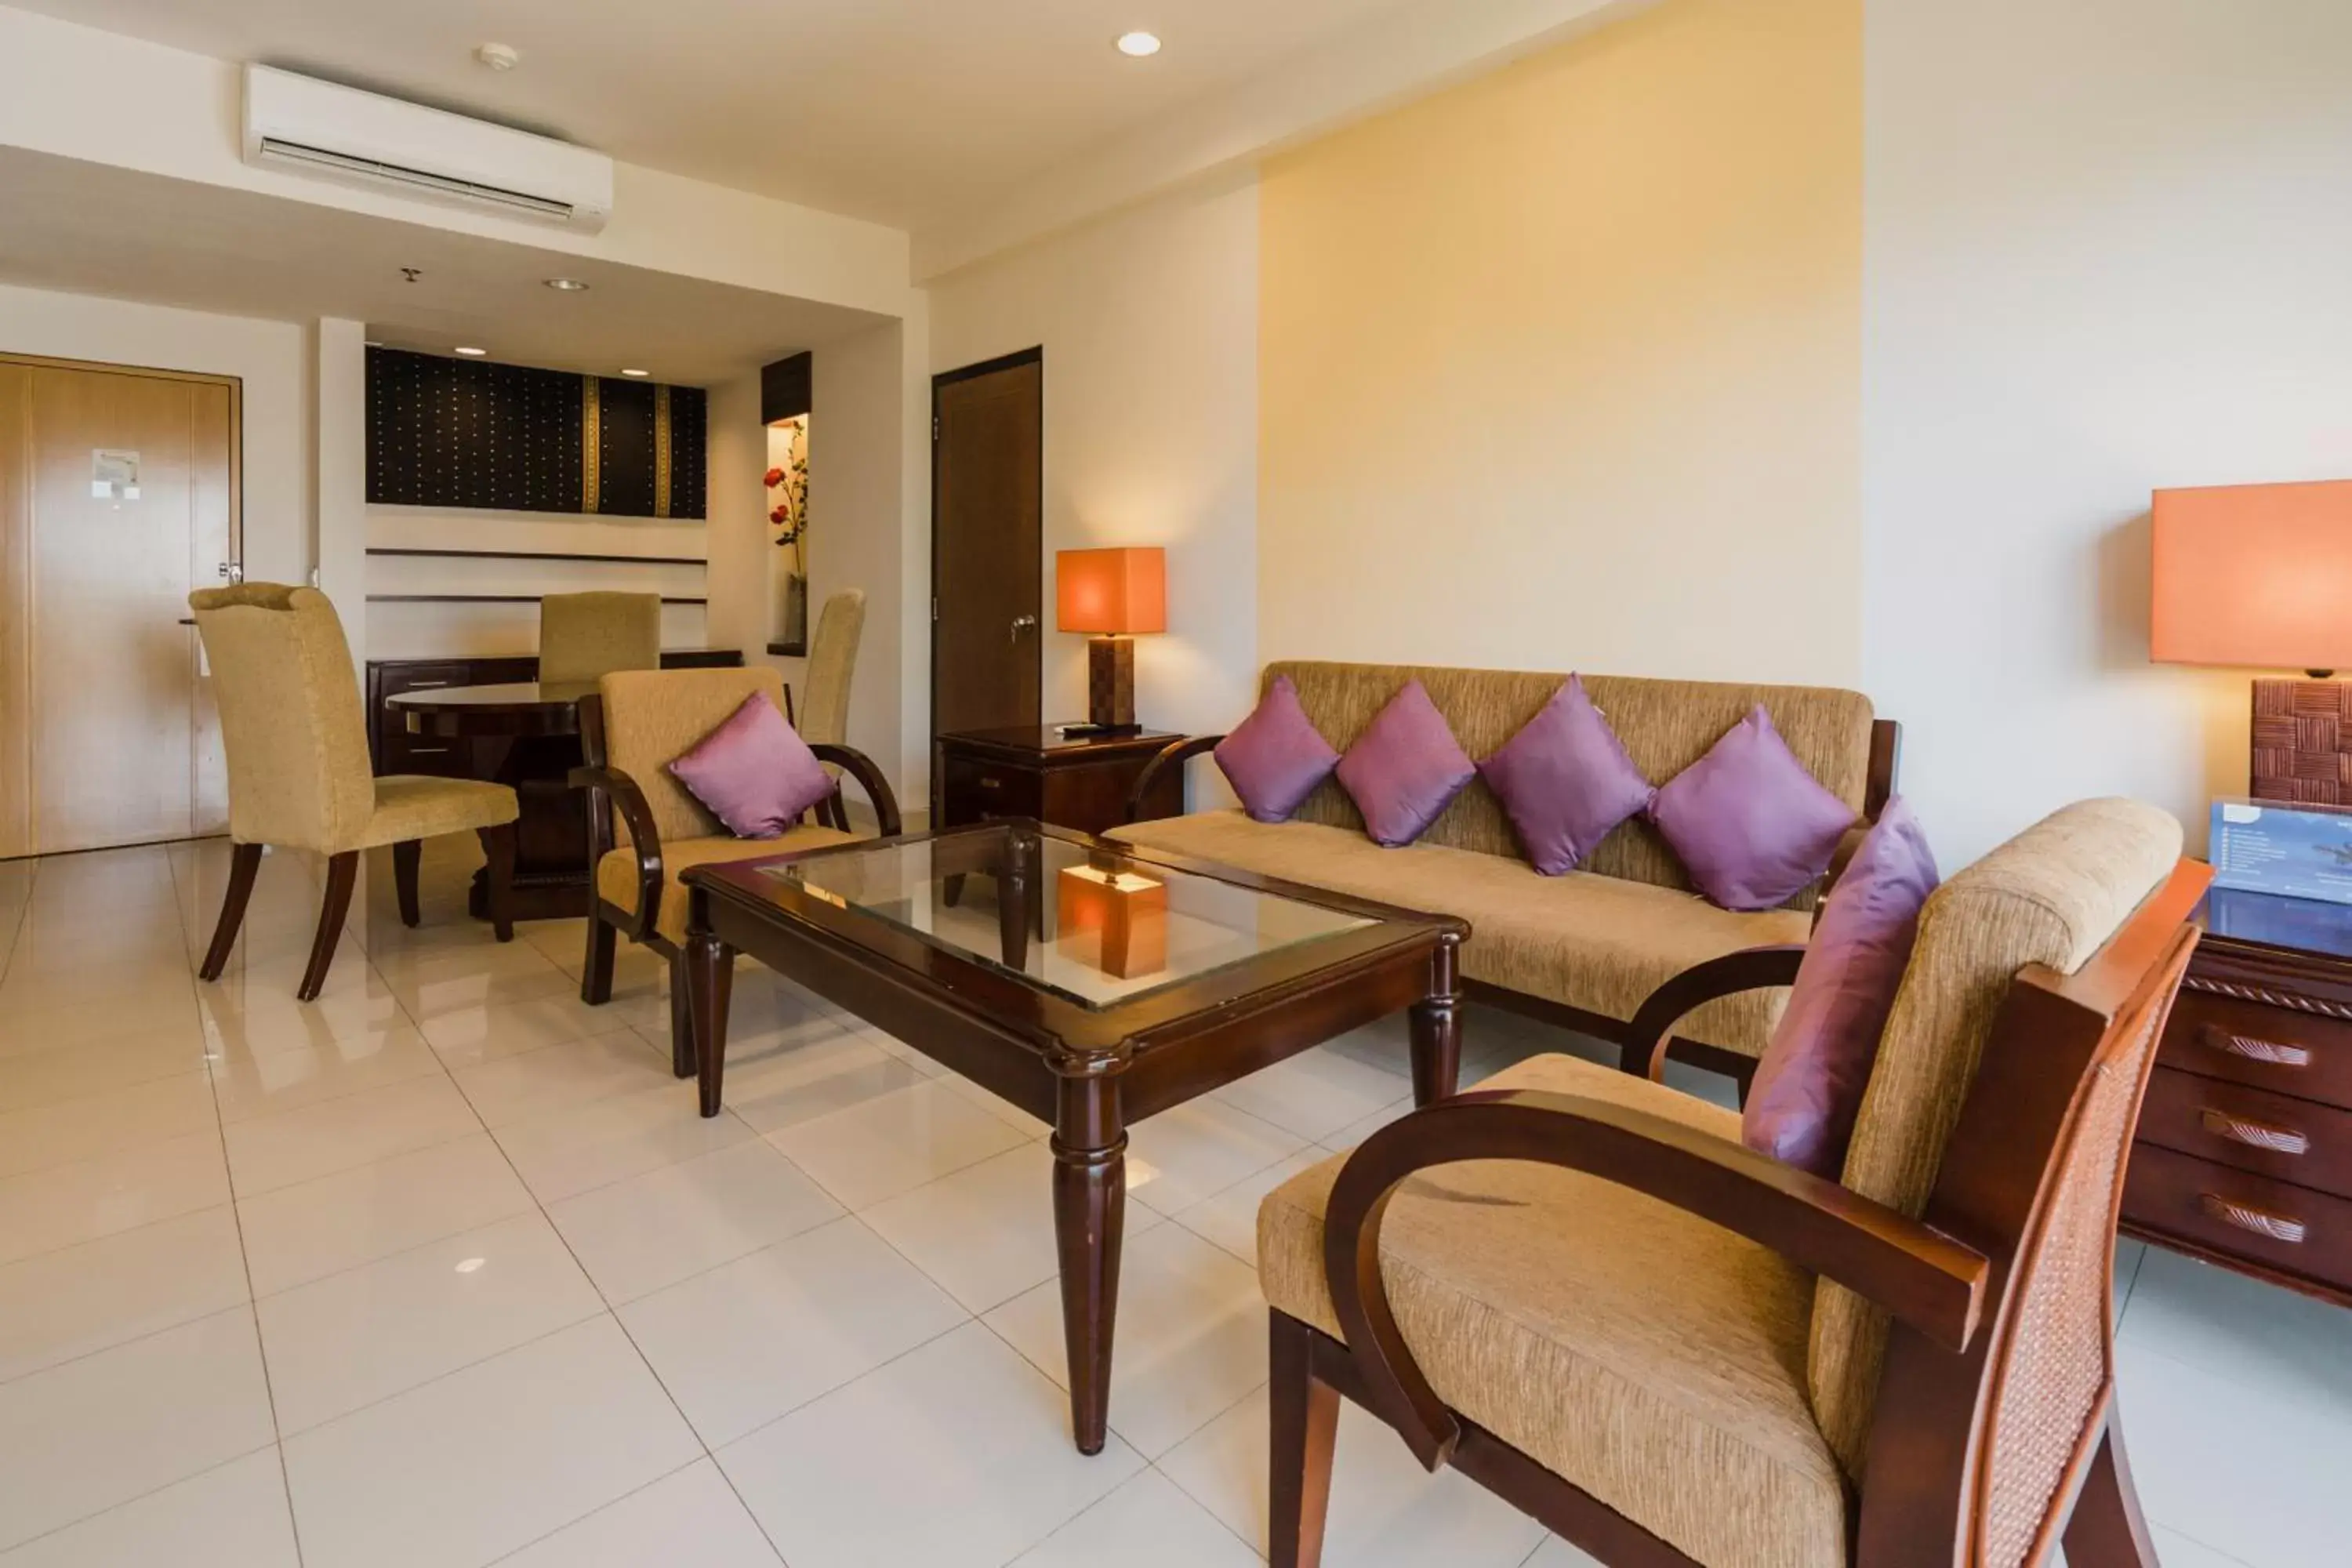 Seating Area in Bintang Flores Hotel